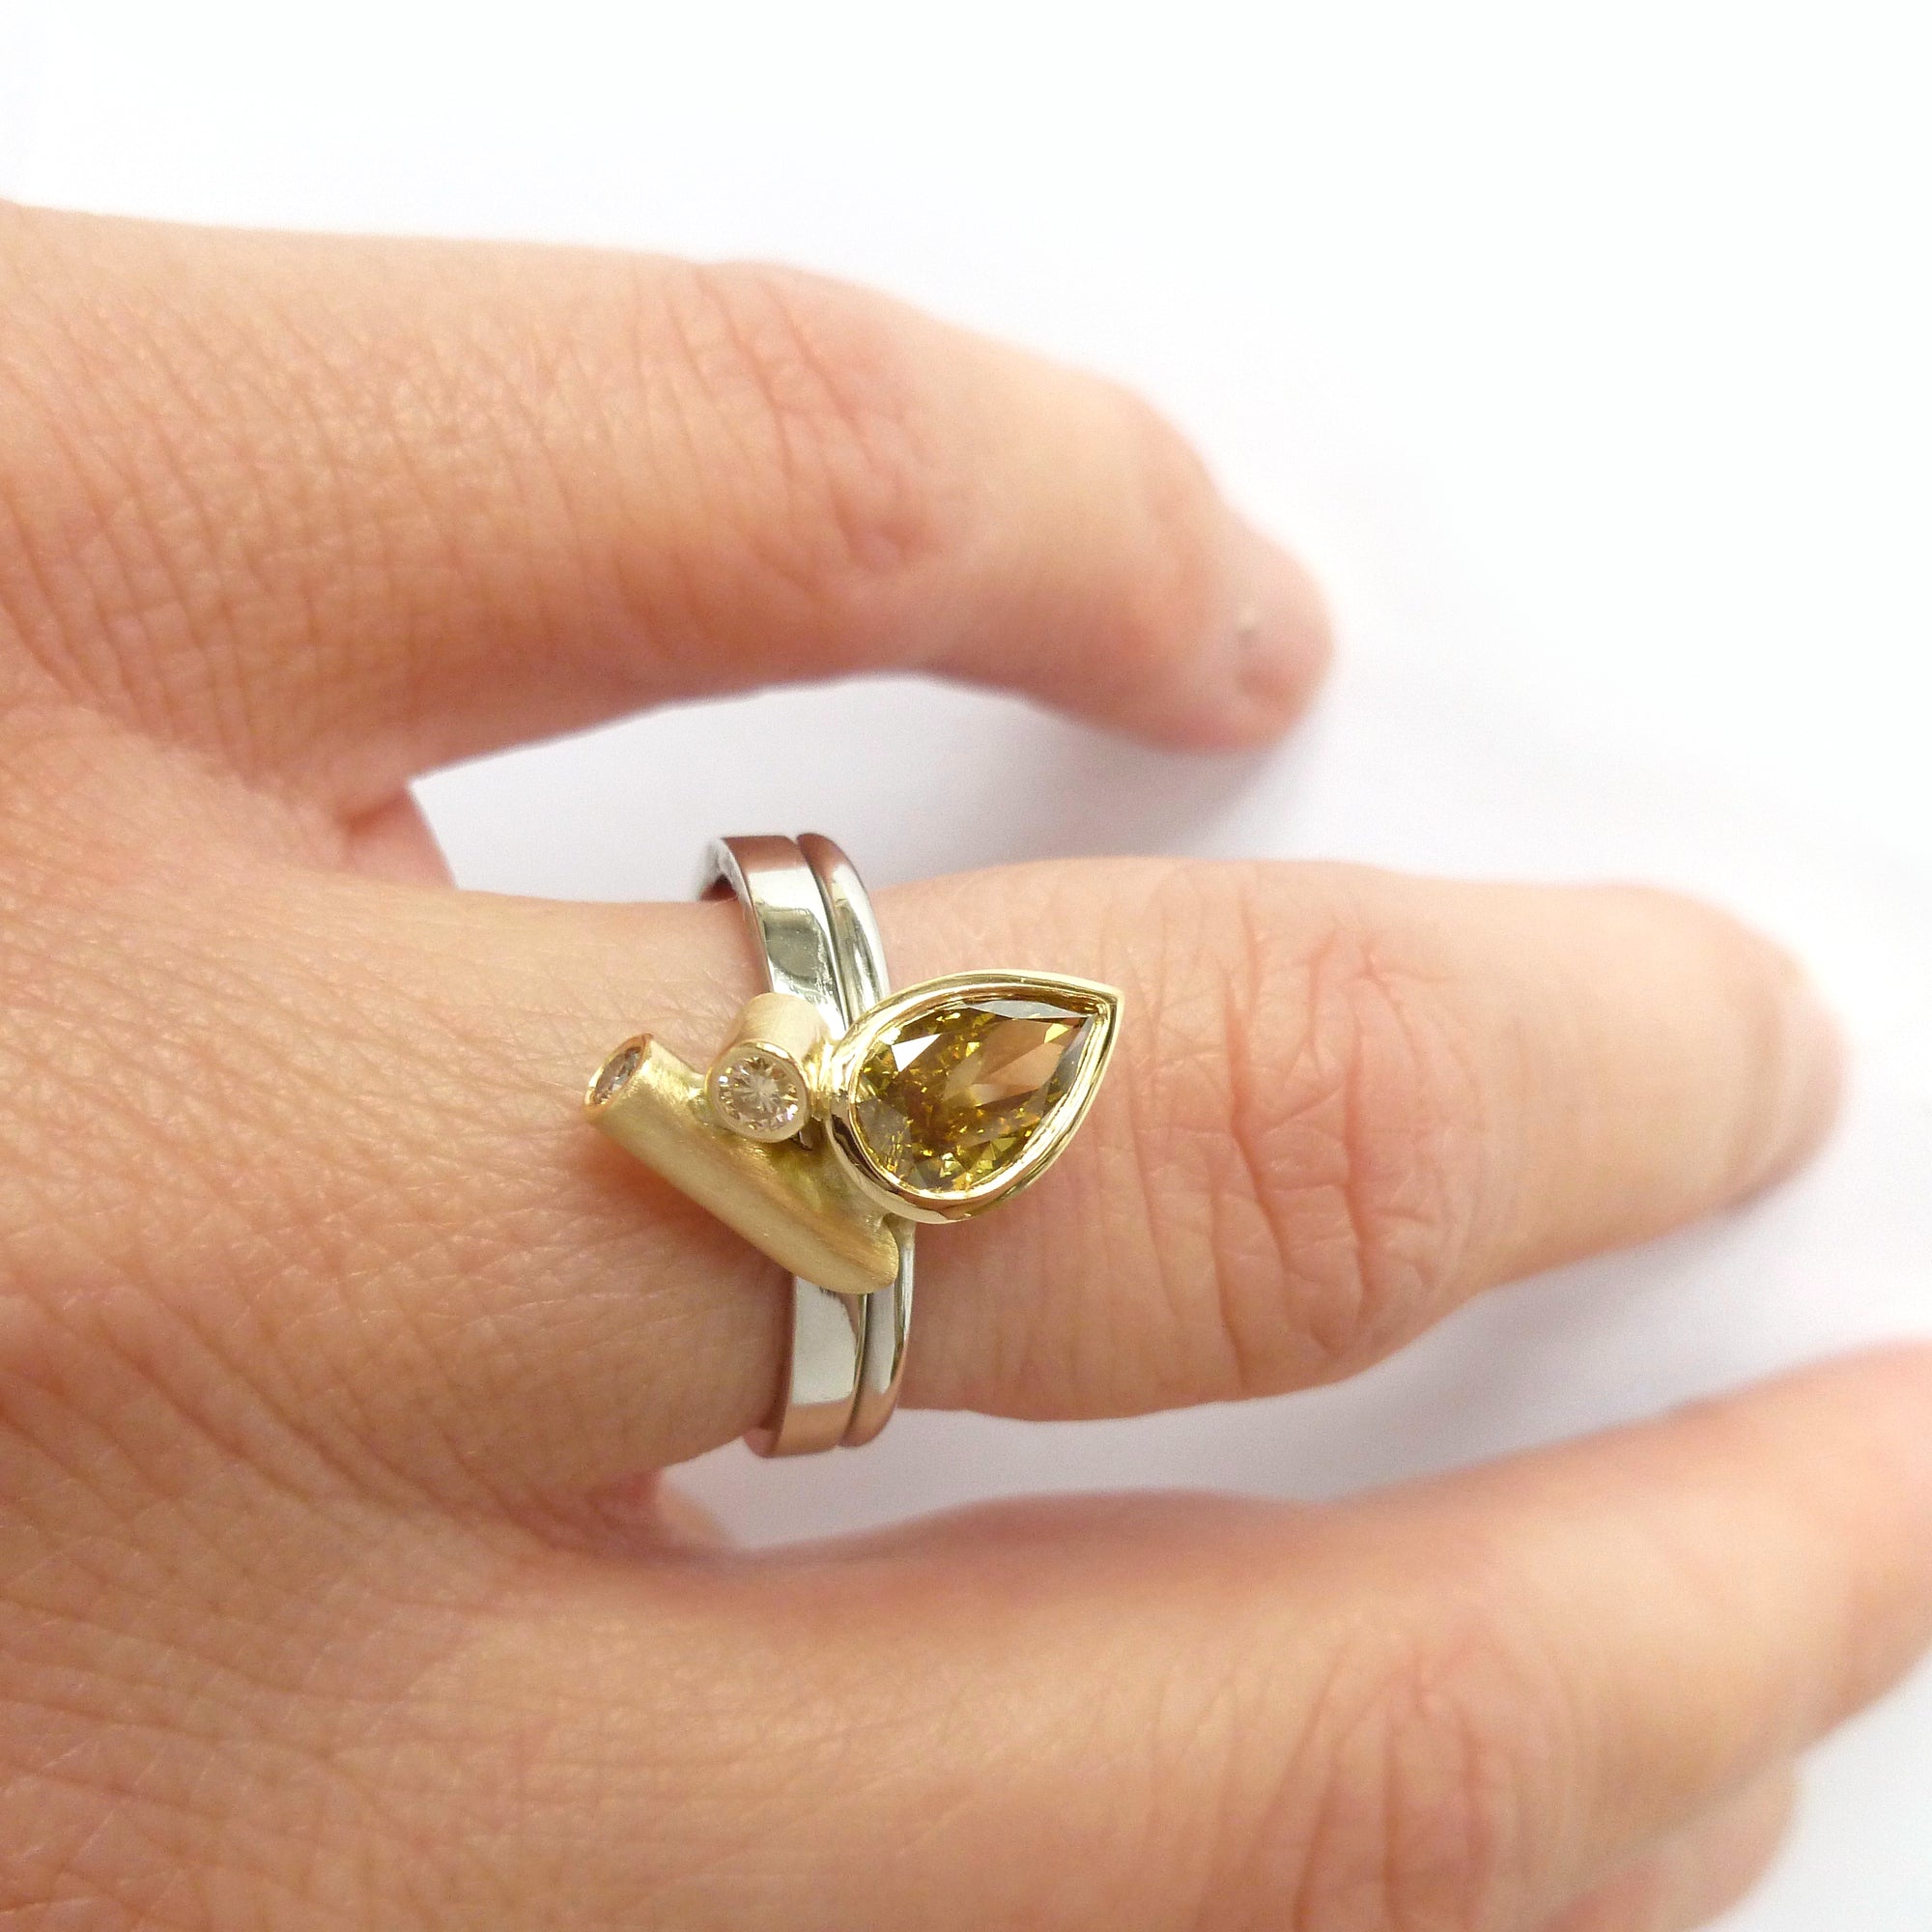 bespoke platinum and gold ring with natural green pear shape diamond with GIA certification